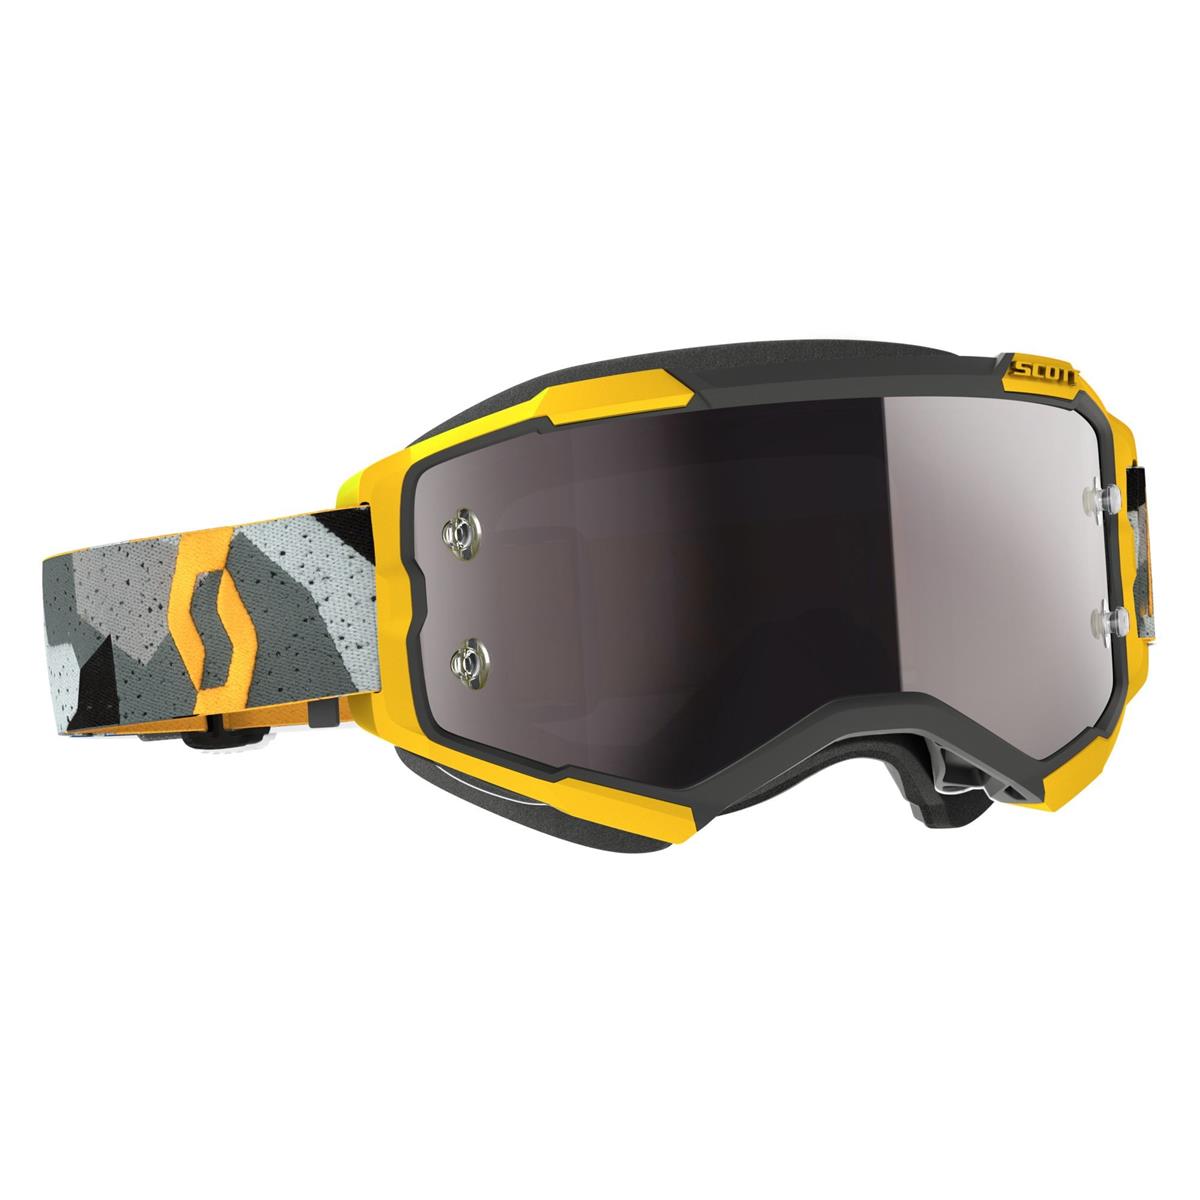 Fury goggle Yellow/Grey Silver Chrome Works Lens